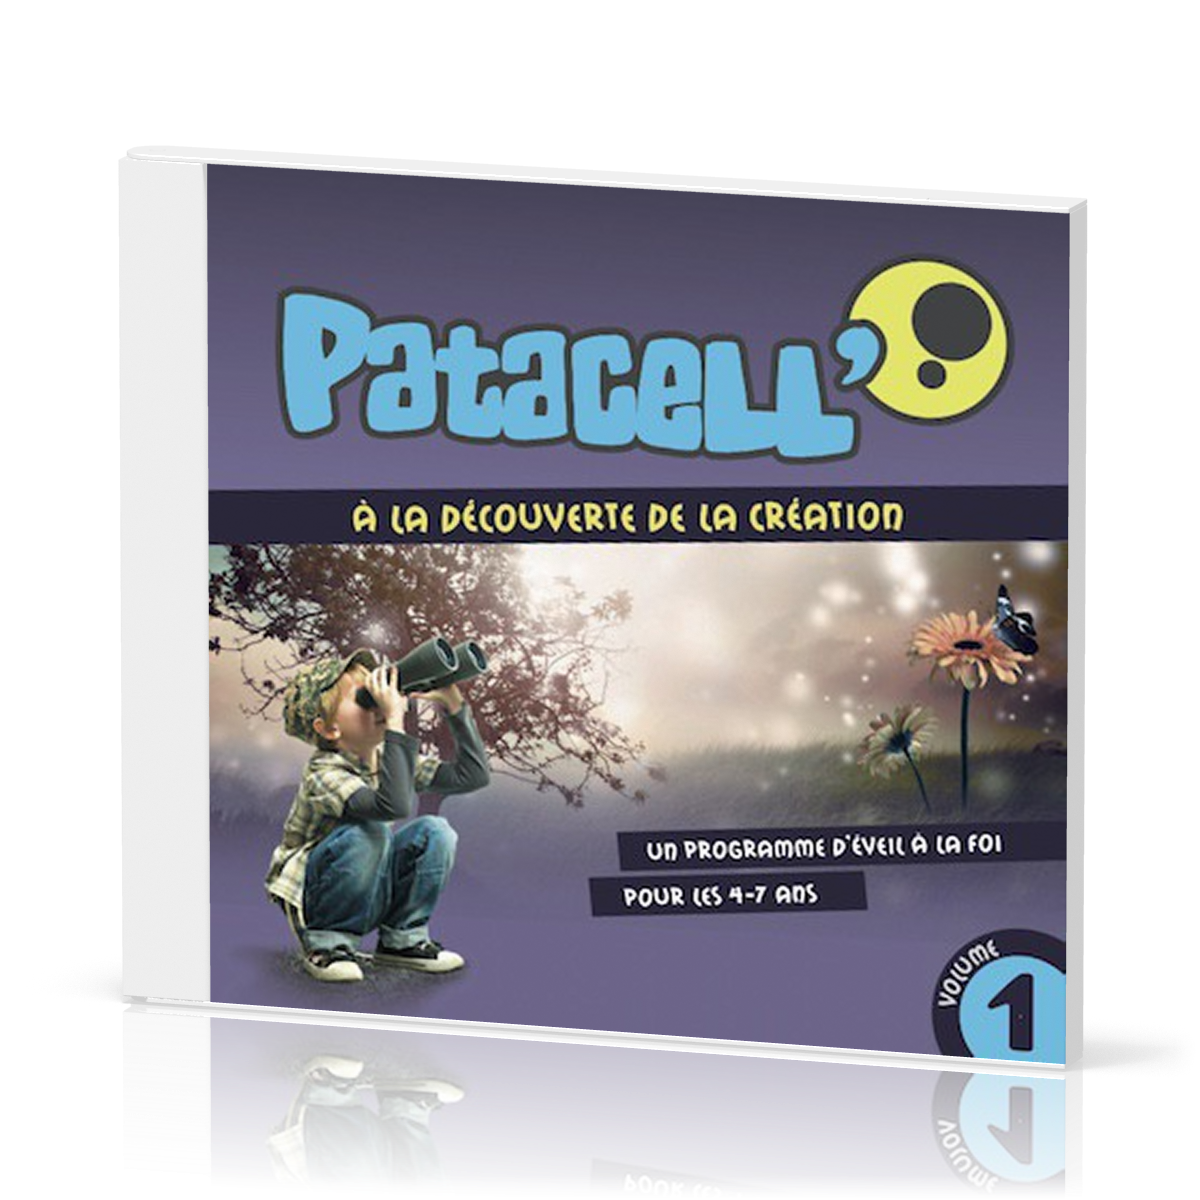 Patacell' - CD - Volume 1